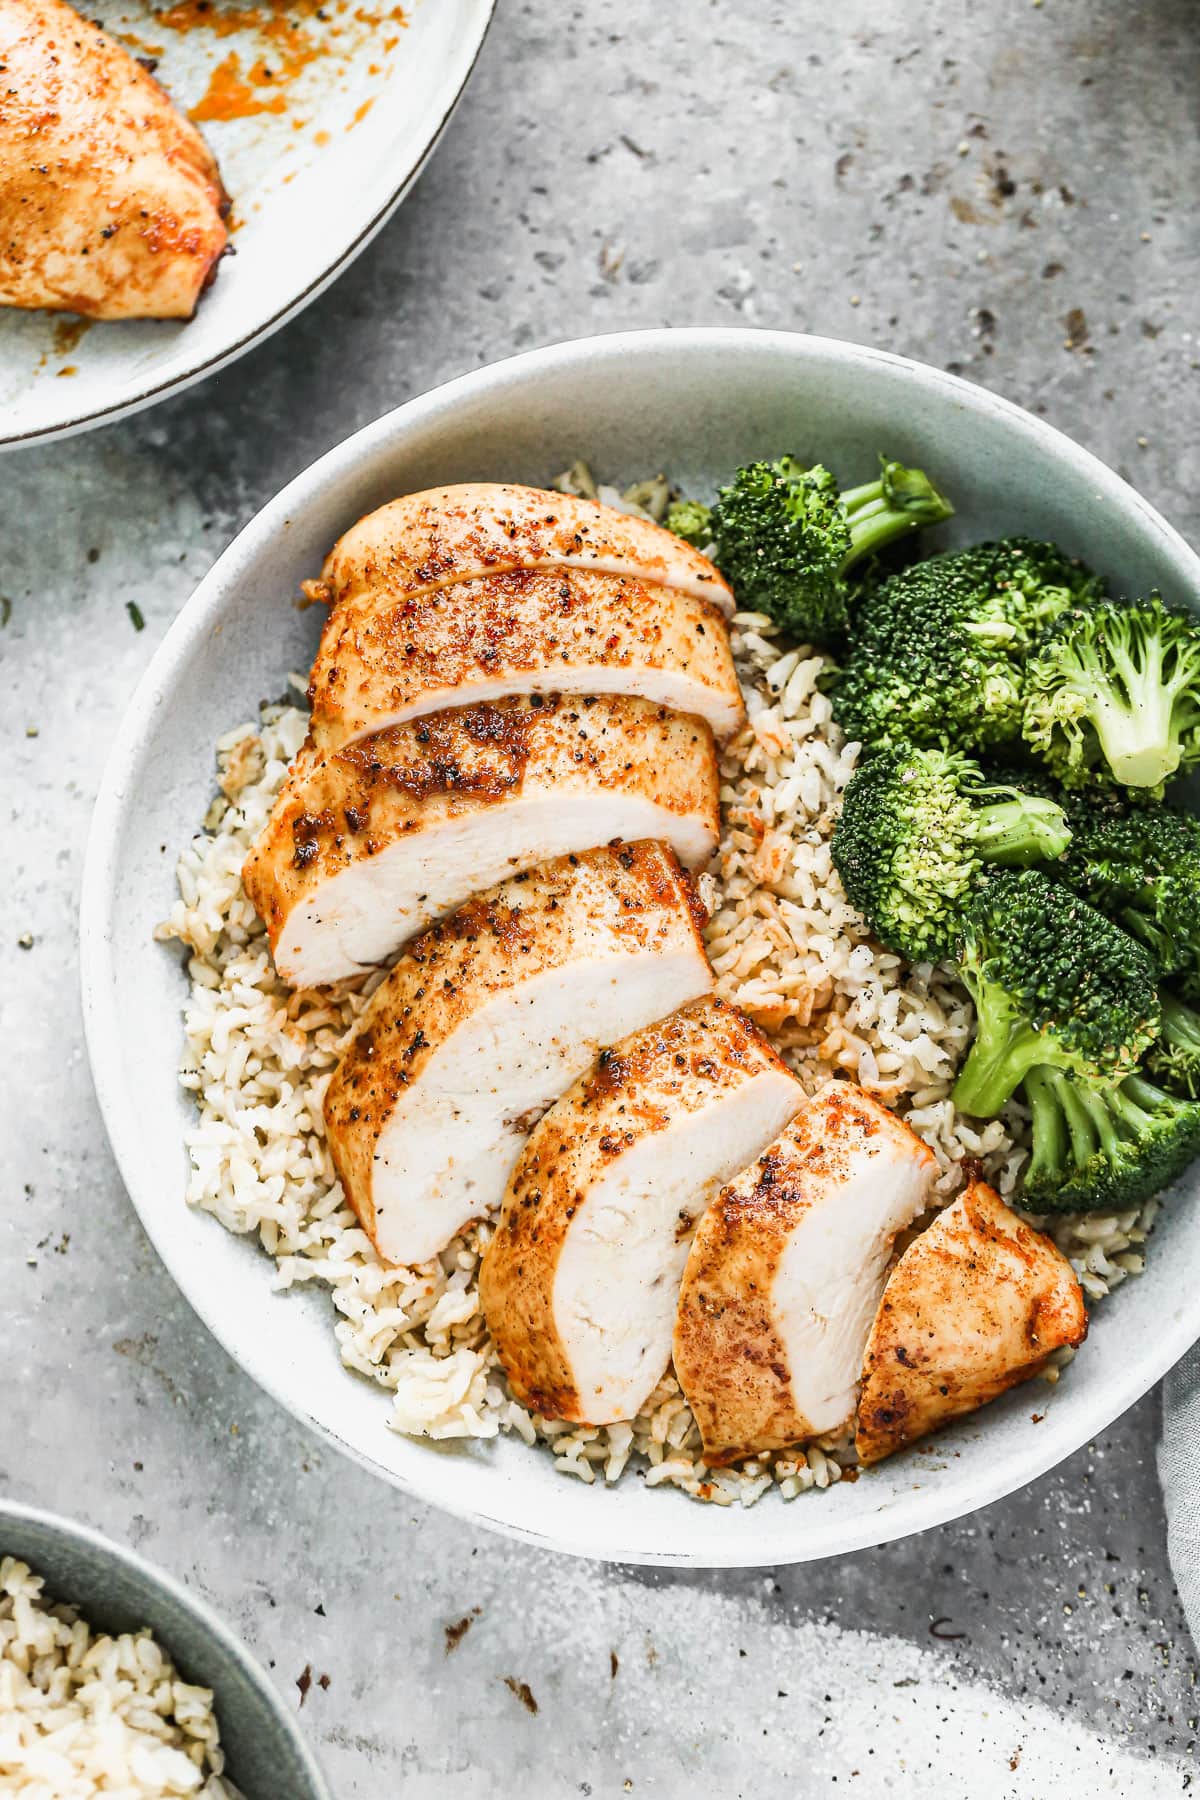 A sliced chicken breast with rice and broccoli